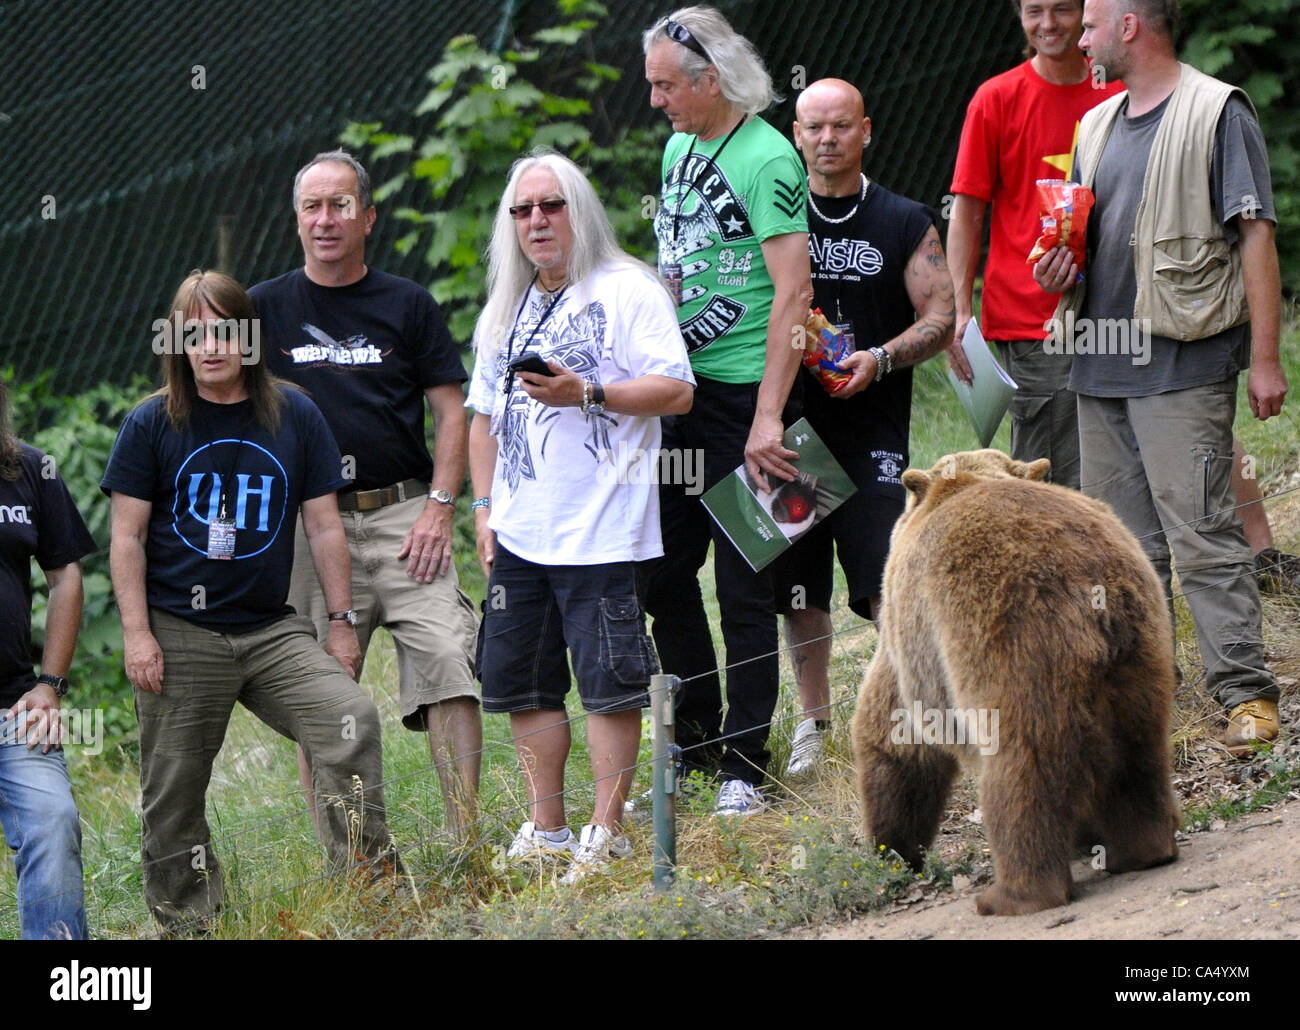 British rock band Uriah Heep which will play at the festival Metalfest in Pilsen, Czech Republic baptised on June 8, 2012 bears Eliska and Honzik in the local zoo in Pilsen. From left bassist Trevor Bolder, director of the Zoo Jiri Travnicek, guitarist Mick Box, keyboardist Phil Lanzon, drummer Russ Stock Photo